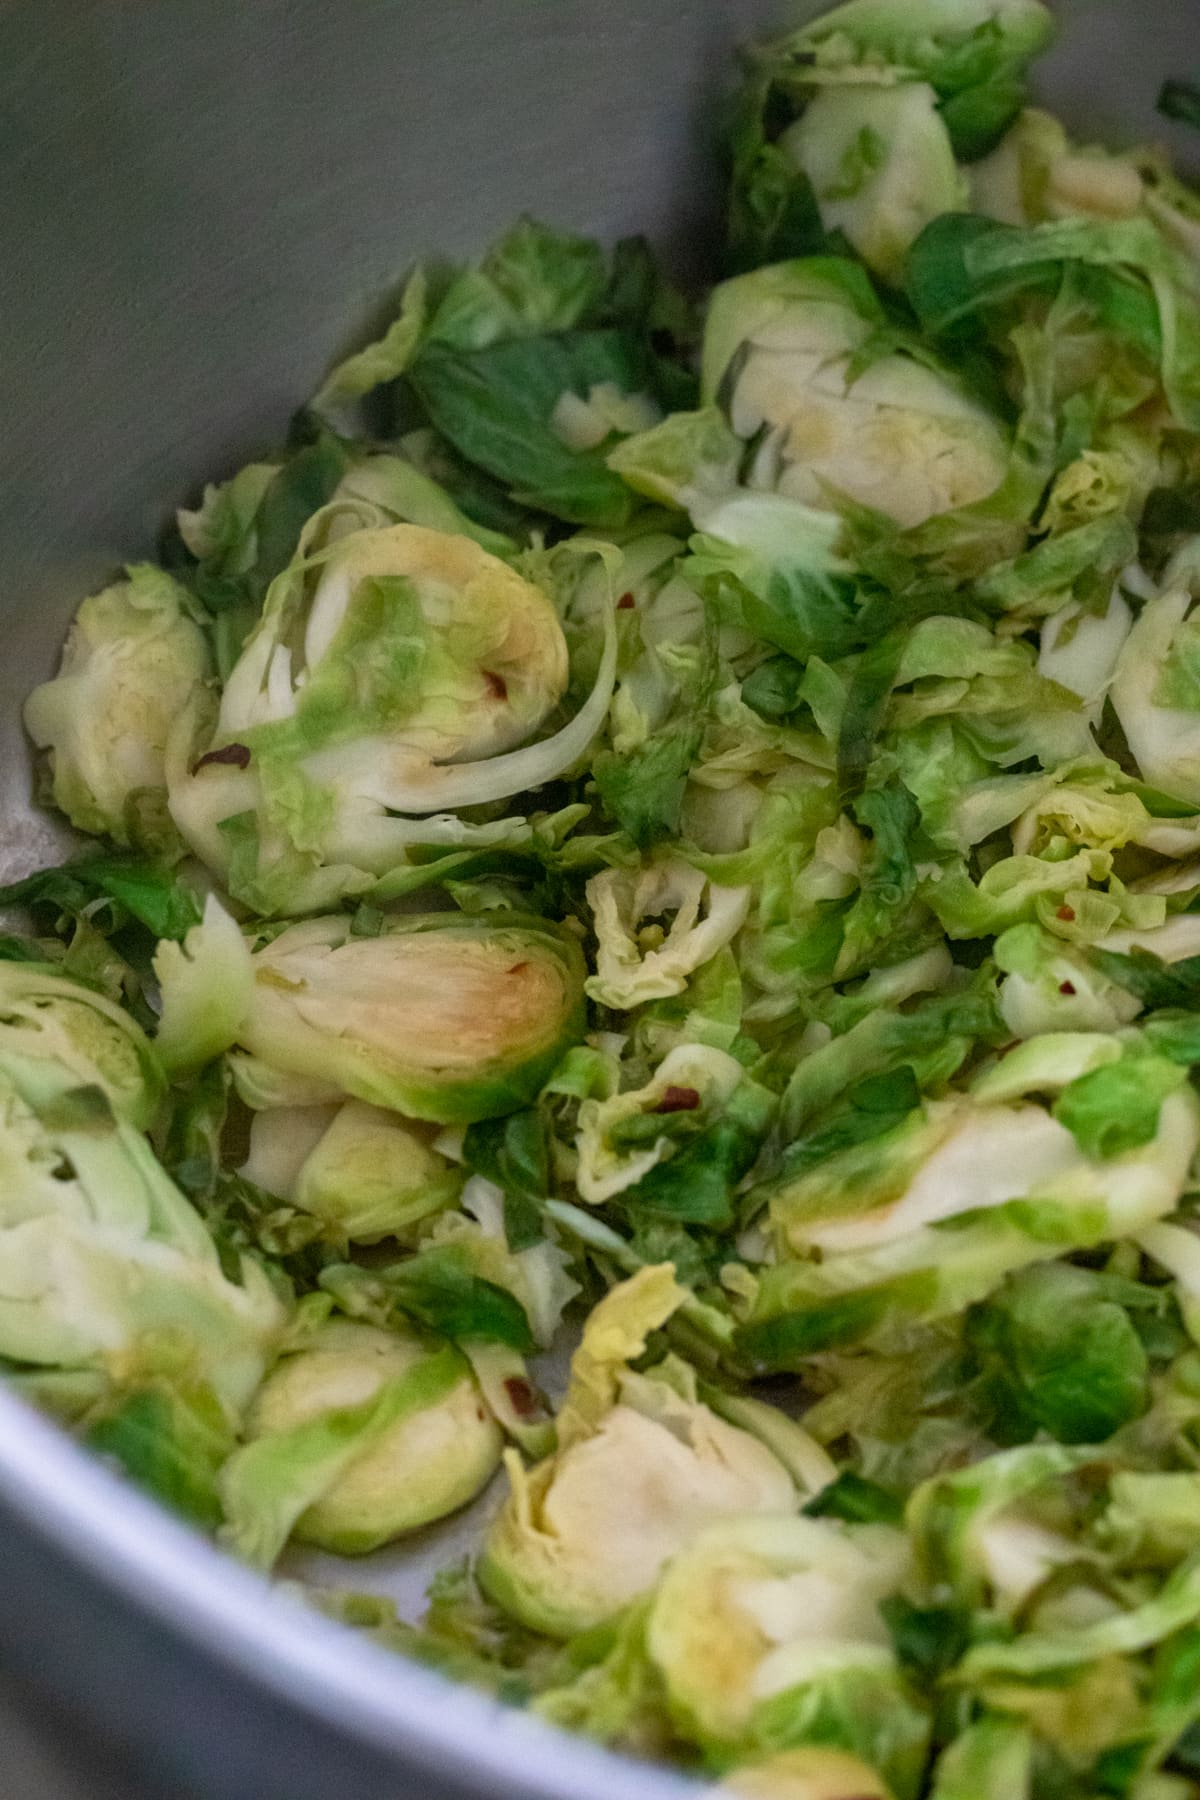 sautéing shredded brussels sprouts with garlic and lemon